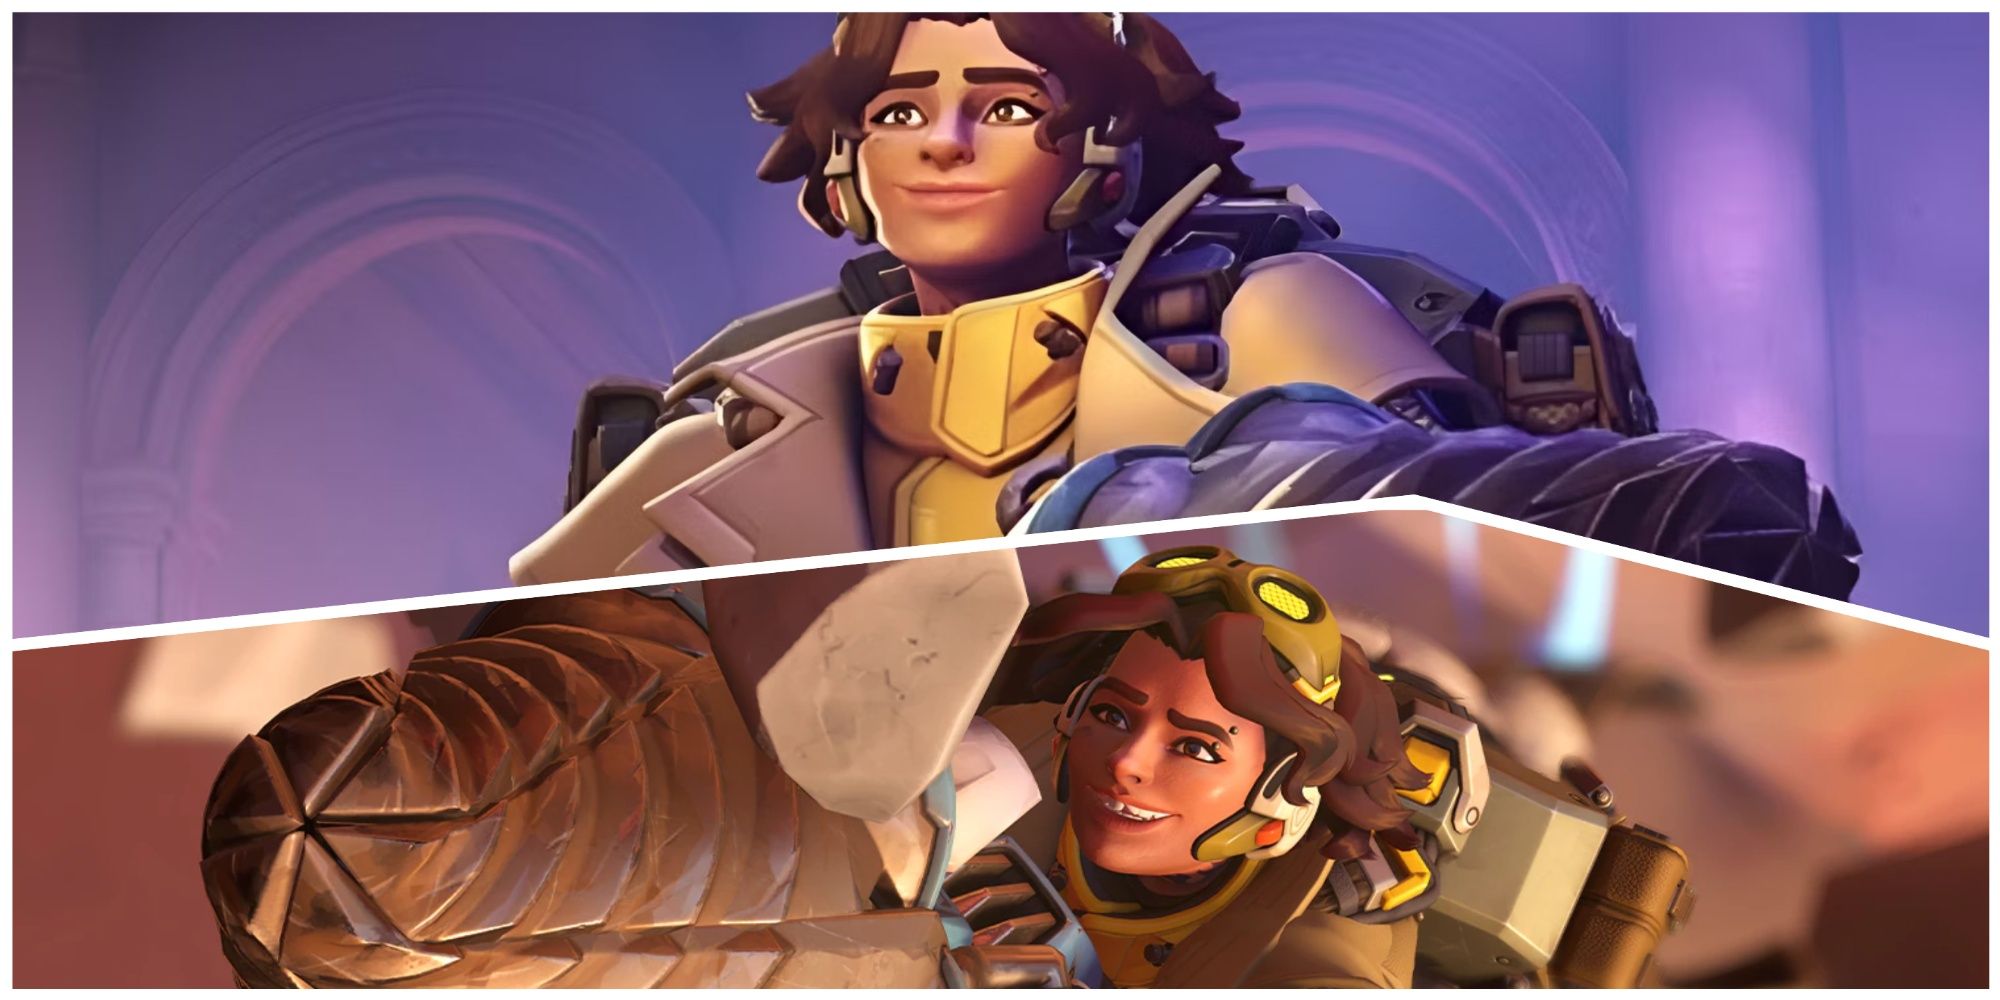 Collage of Venture Images from Overwatch 2